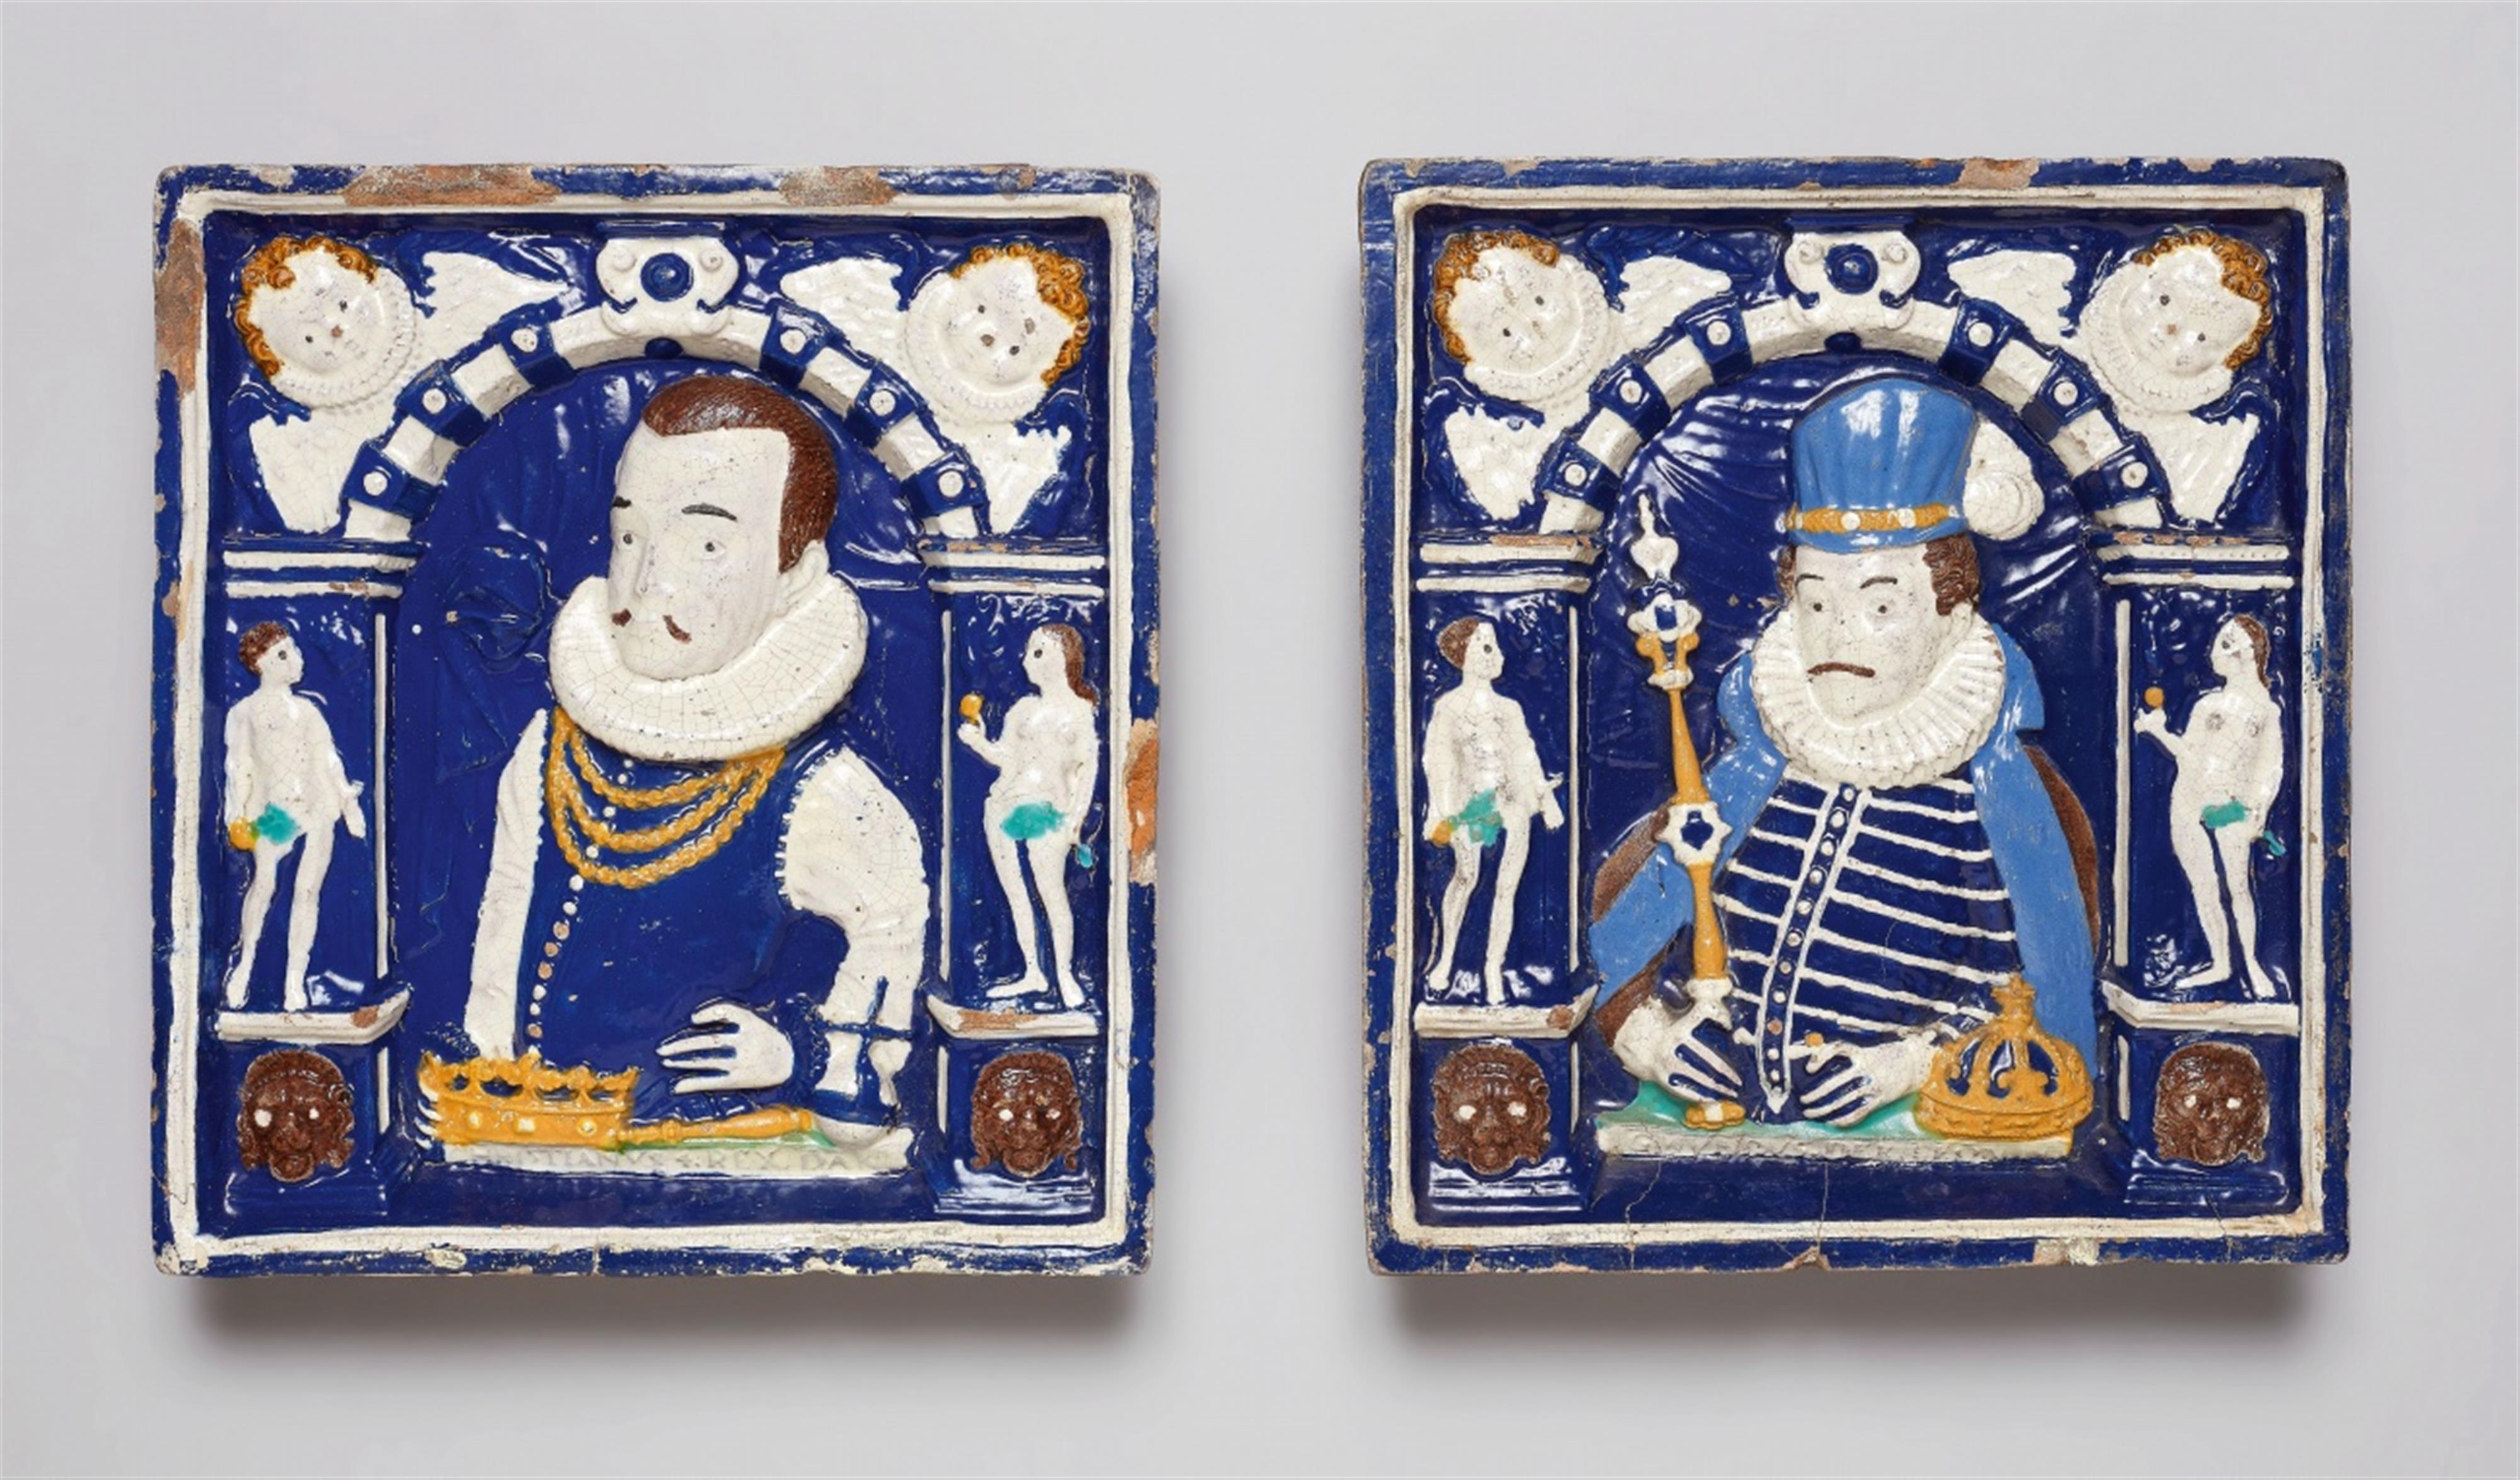 A pair of ceramic stove tiles with portraits of Emperor Sigismund and King Christian IV - image-1